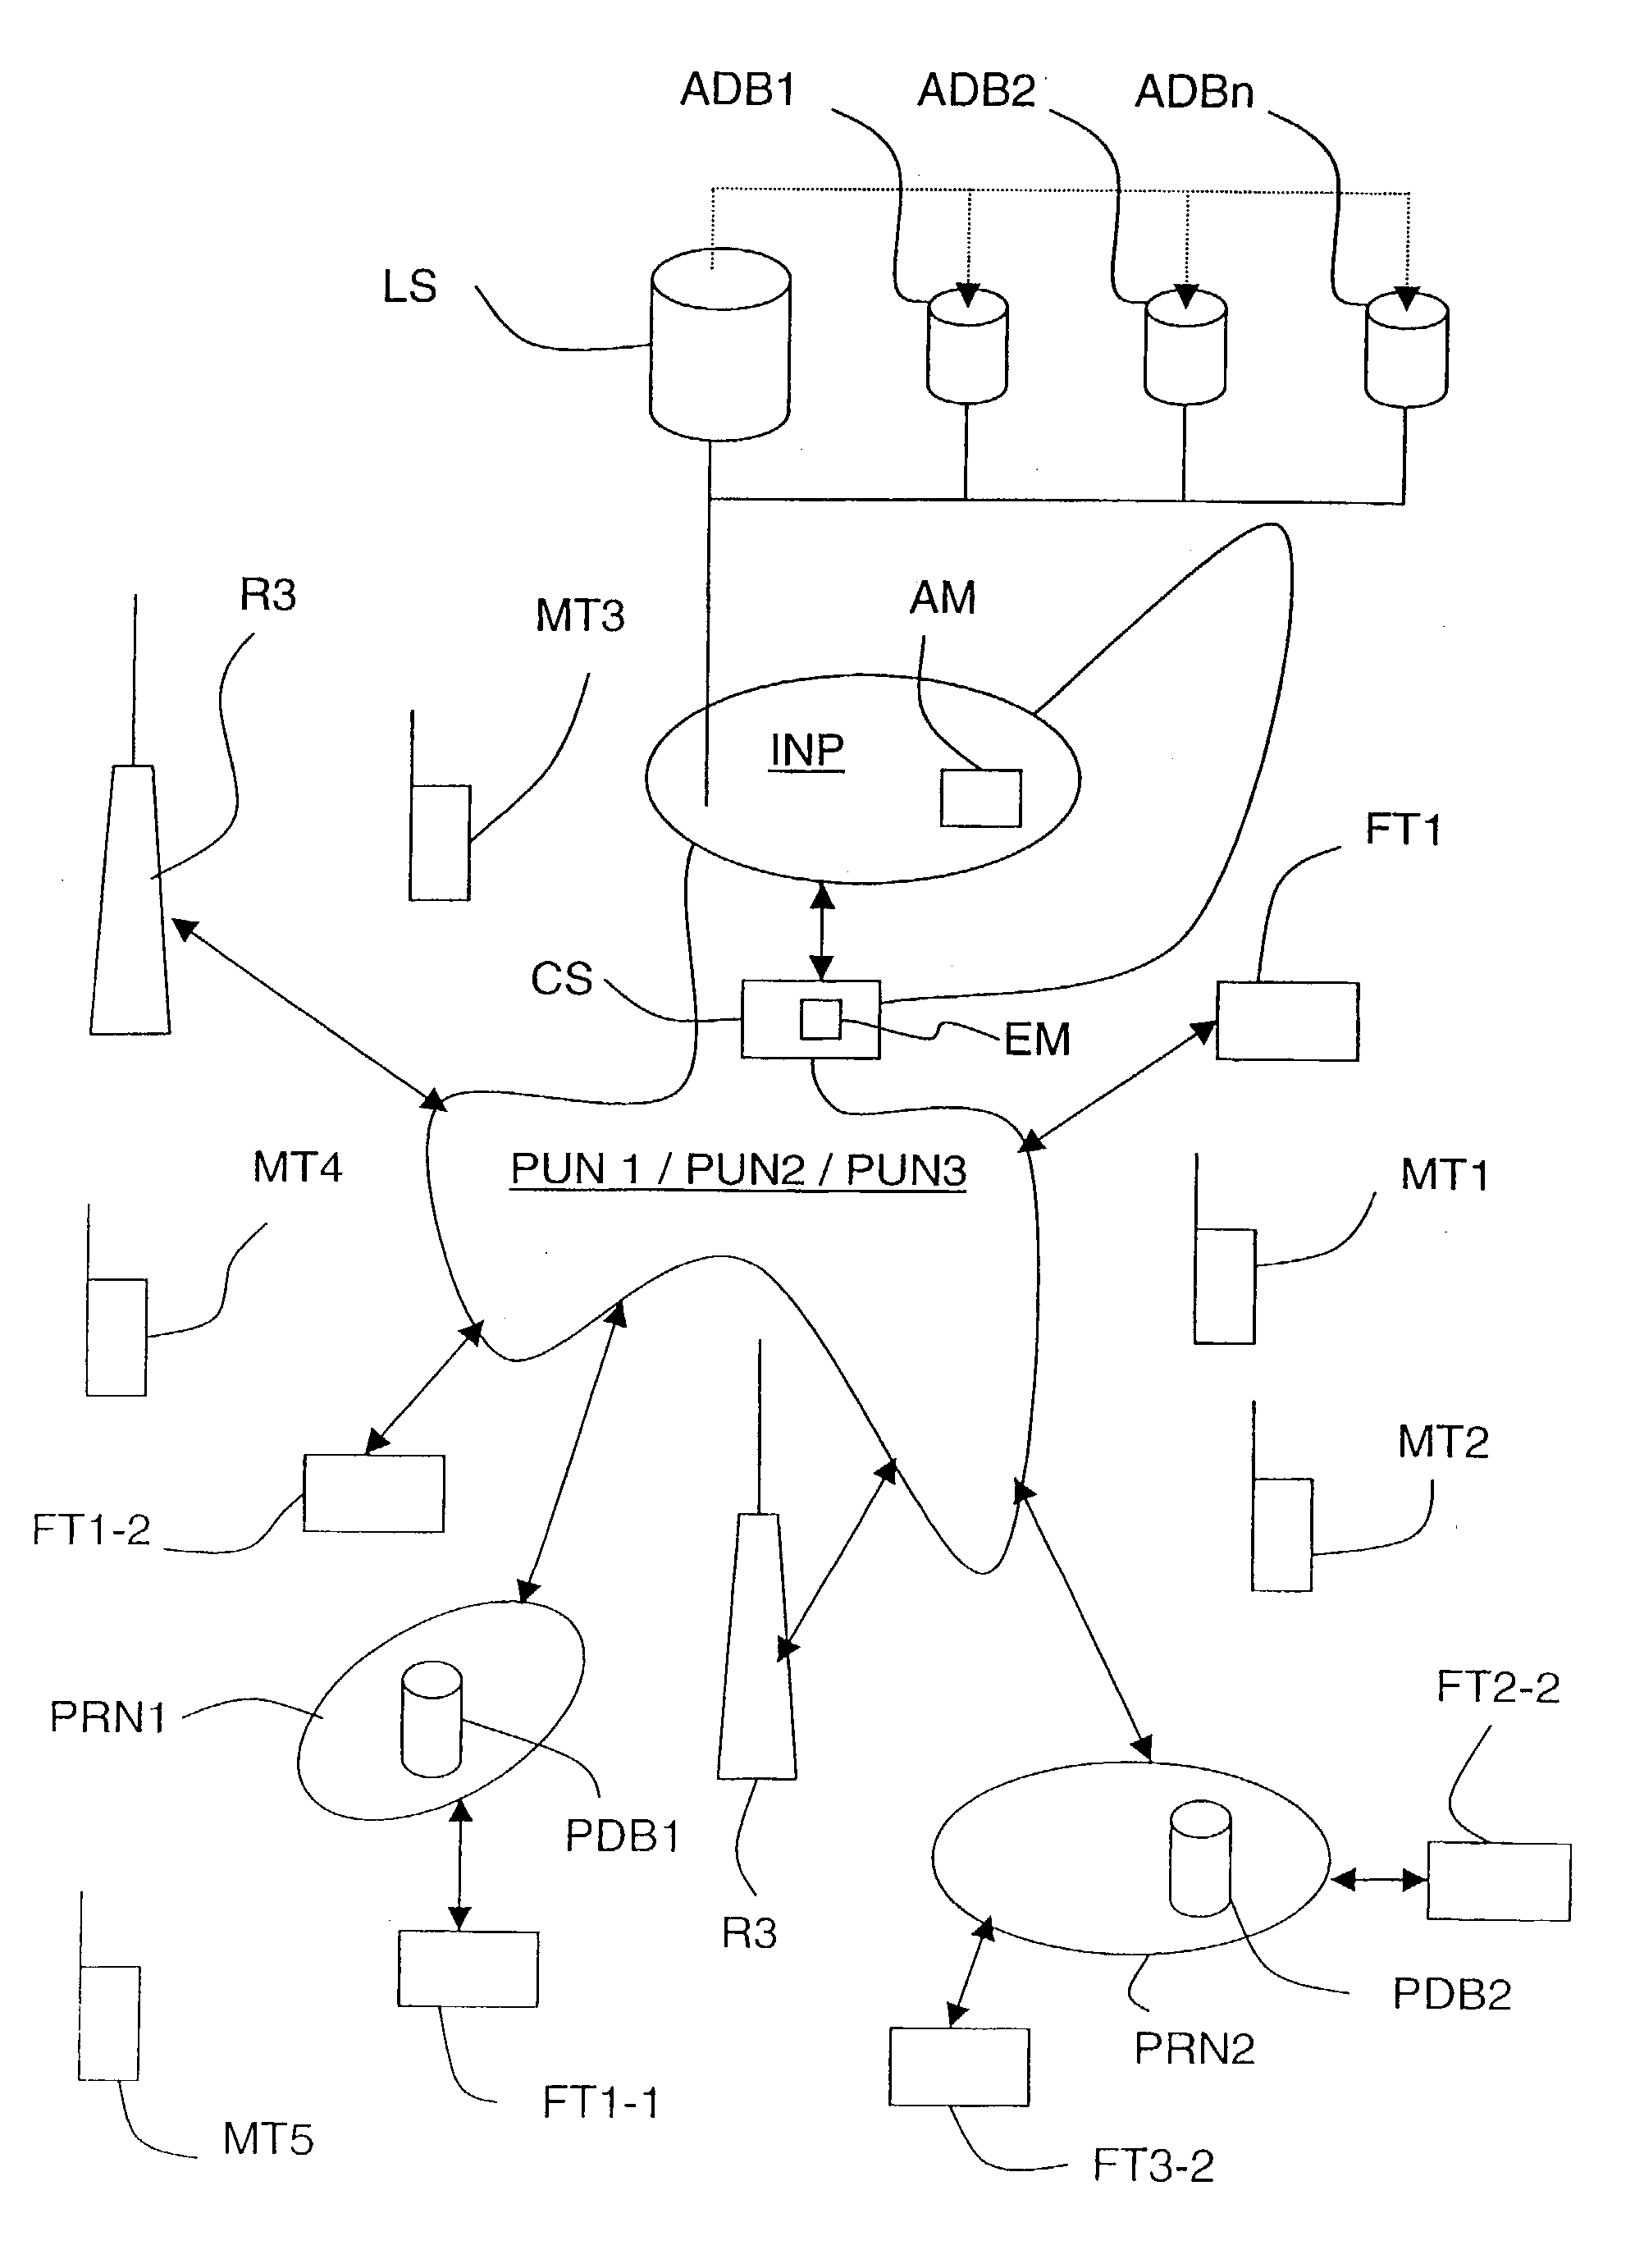 Method of providing services to remote private terminals and an associated device